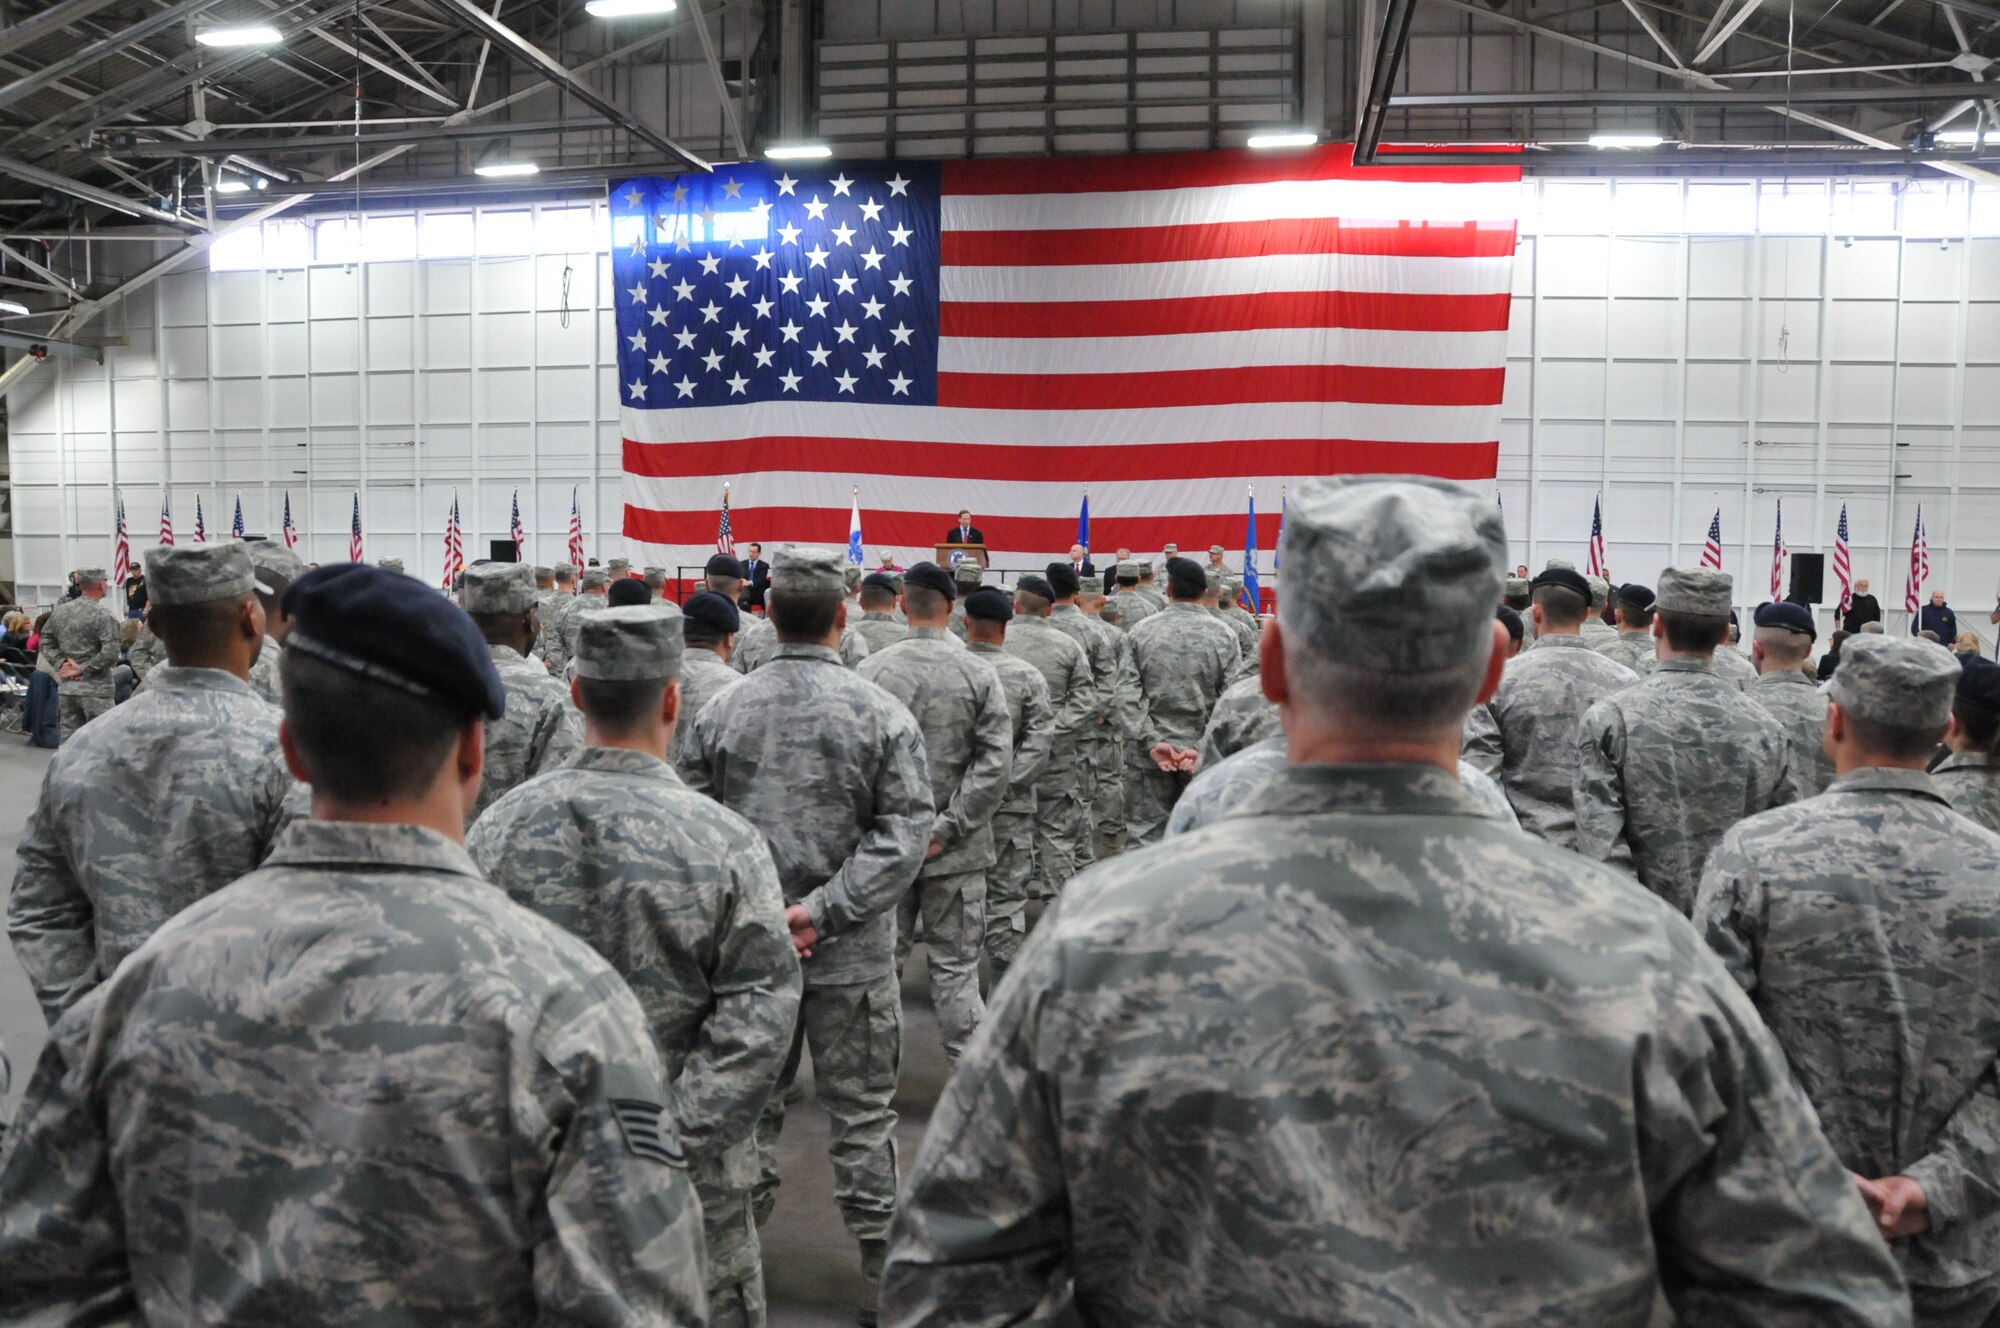 Airmen from the 103rd Civil Engineer Squadron, the 103rd Security Forces Squadron and the 103rd Air Operations Group stand at parade rest while Connecticut Governor Dannel P. Malloy addresses them along with Army National Guardsmen during a Joint Freedom Salute Ceremony in the main hangar at Bradley Air National Guard Base in East Granby, Conn. March 31, 2012. Airmen and Soldiers of the Connecticut National Guard were formally welcomed home and honored following deployments over the past year. (U.S. Air Force photo by Tech. Sgt. Erin McNamara\RELEASED)